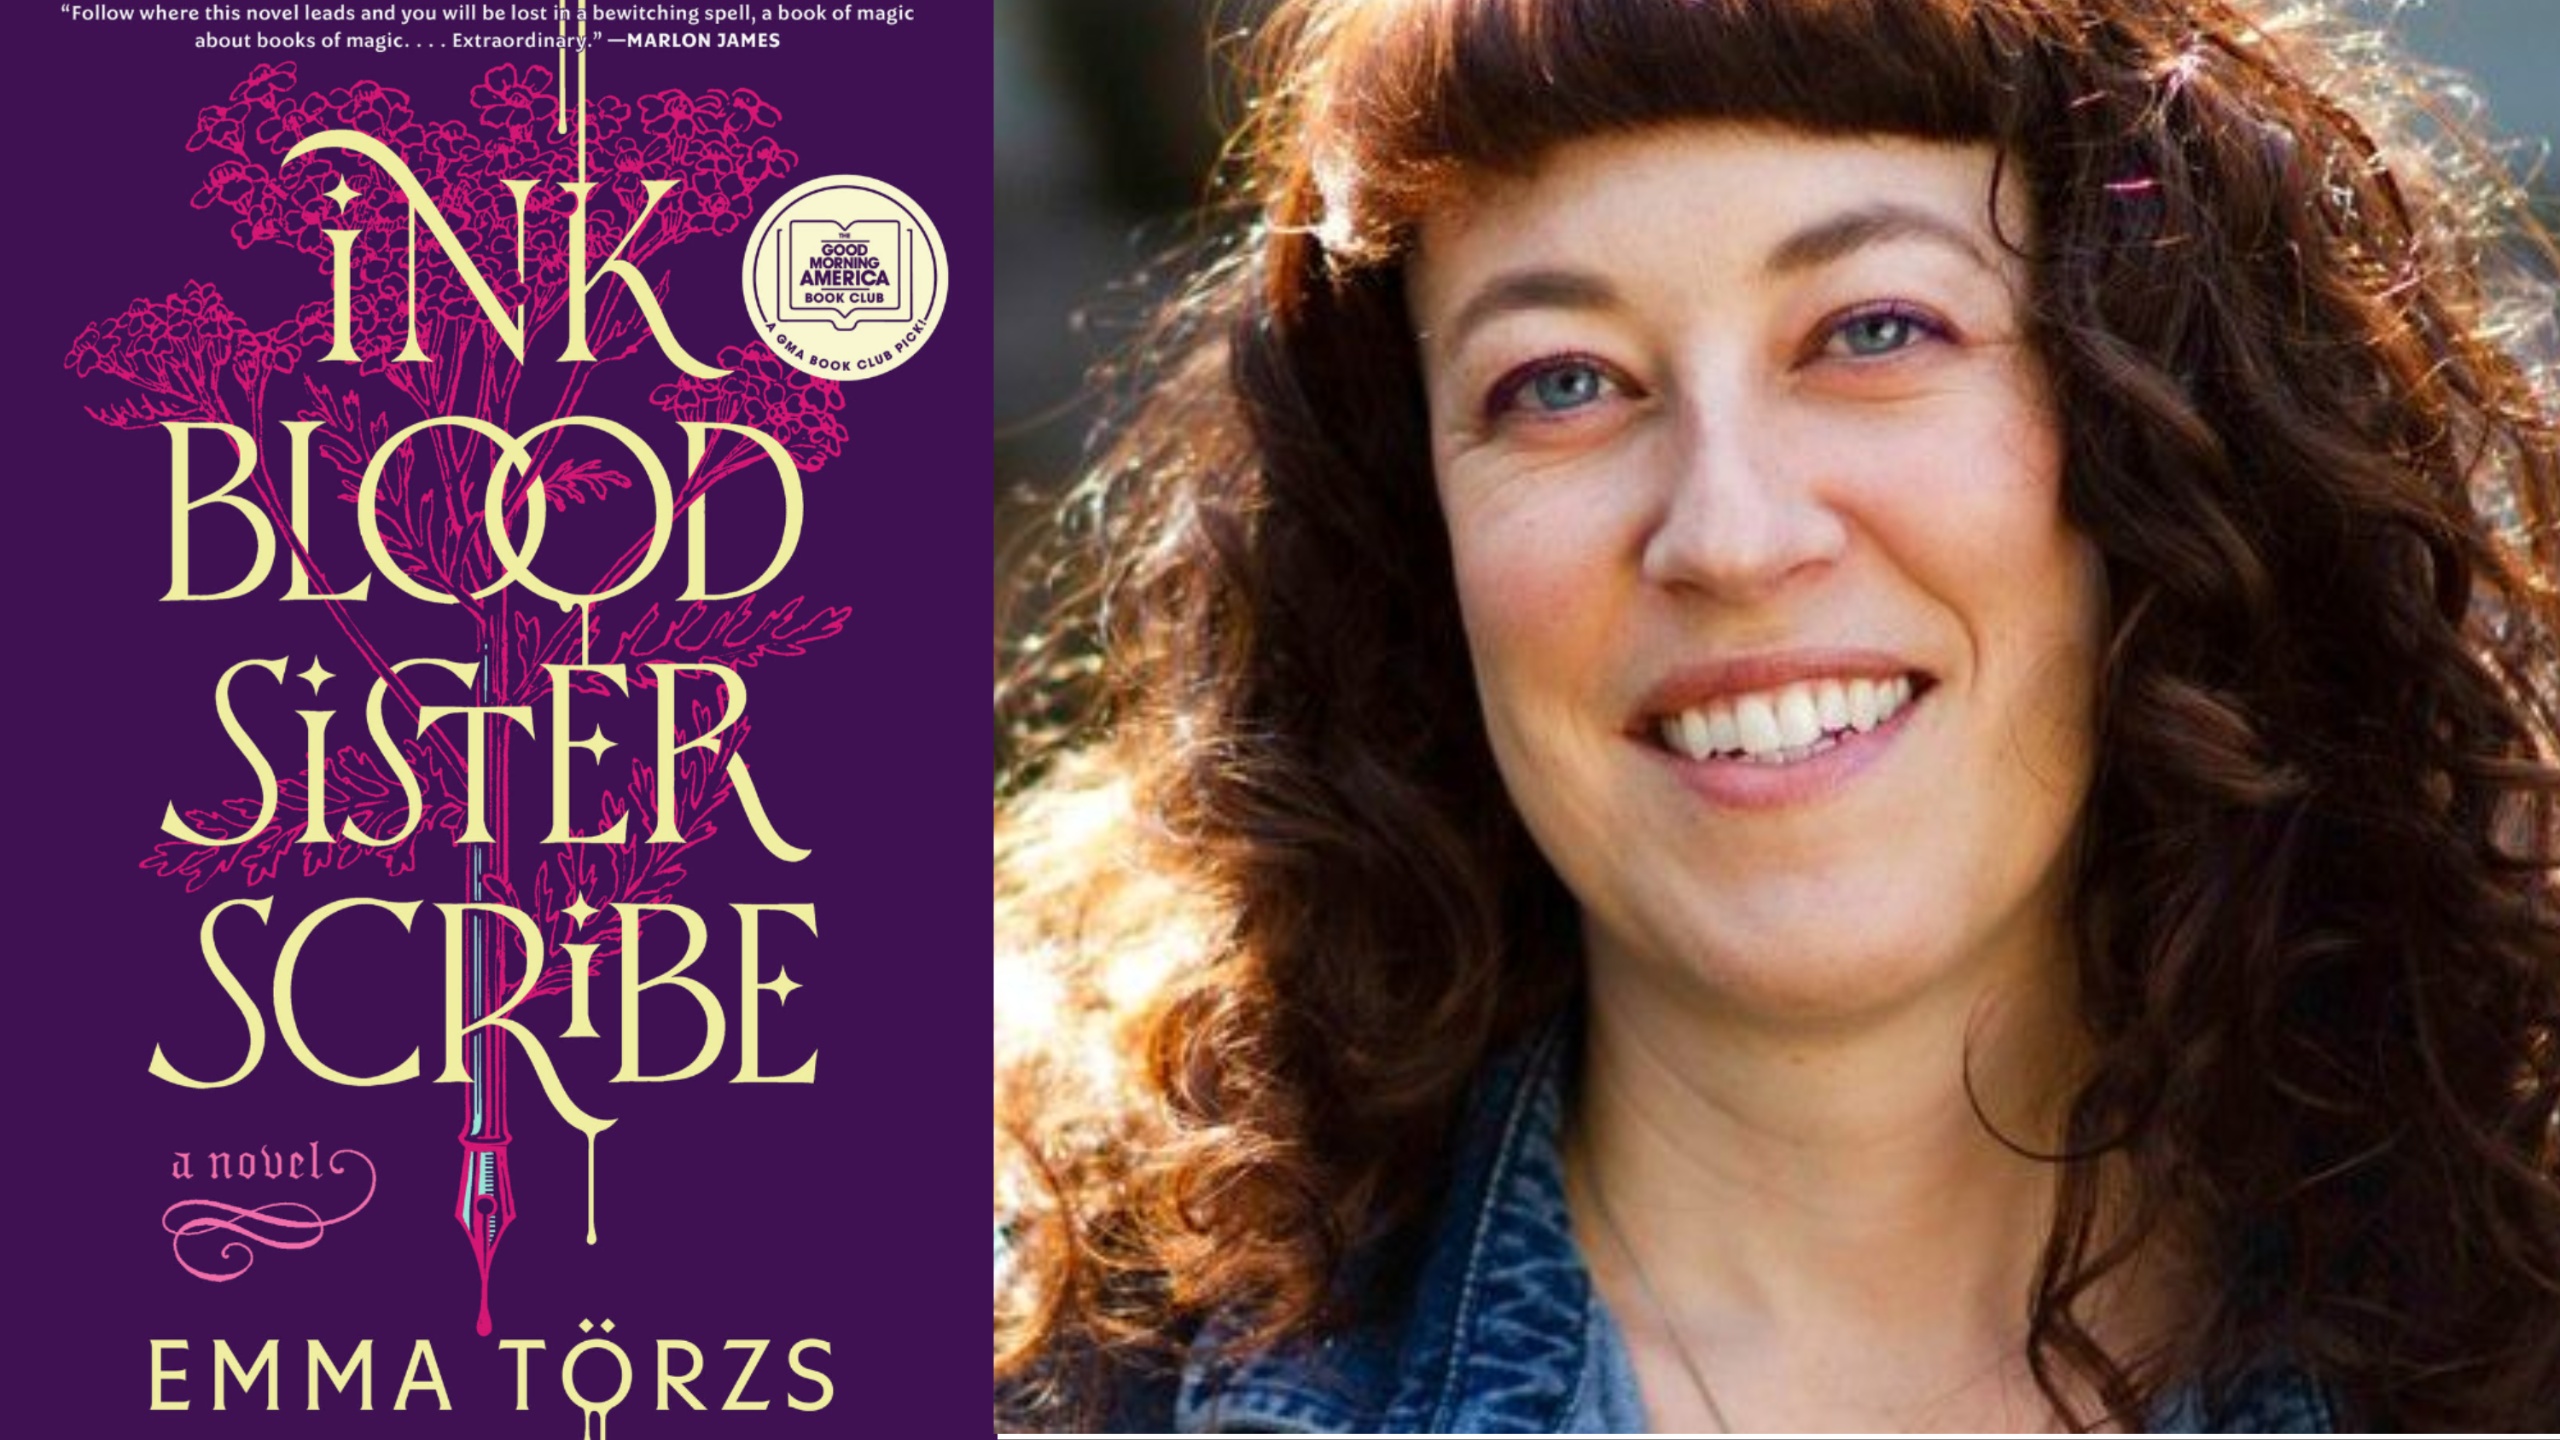 Left: the cover of Ink Blood Sister scribe, with yellow text on a purple background and a pen dripping ink. right: author emma törzs